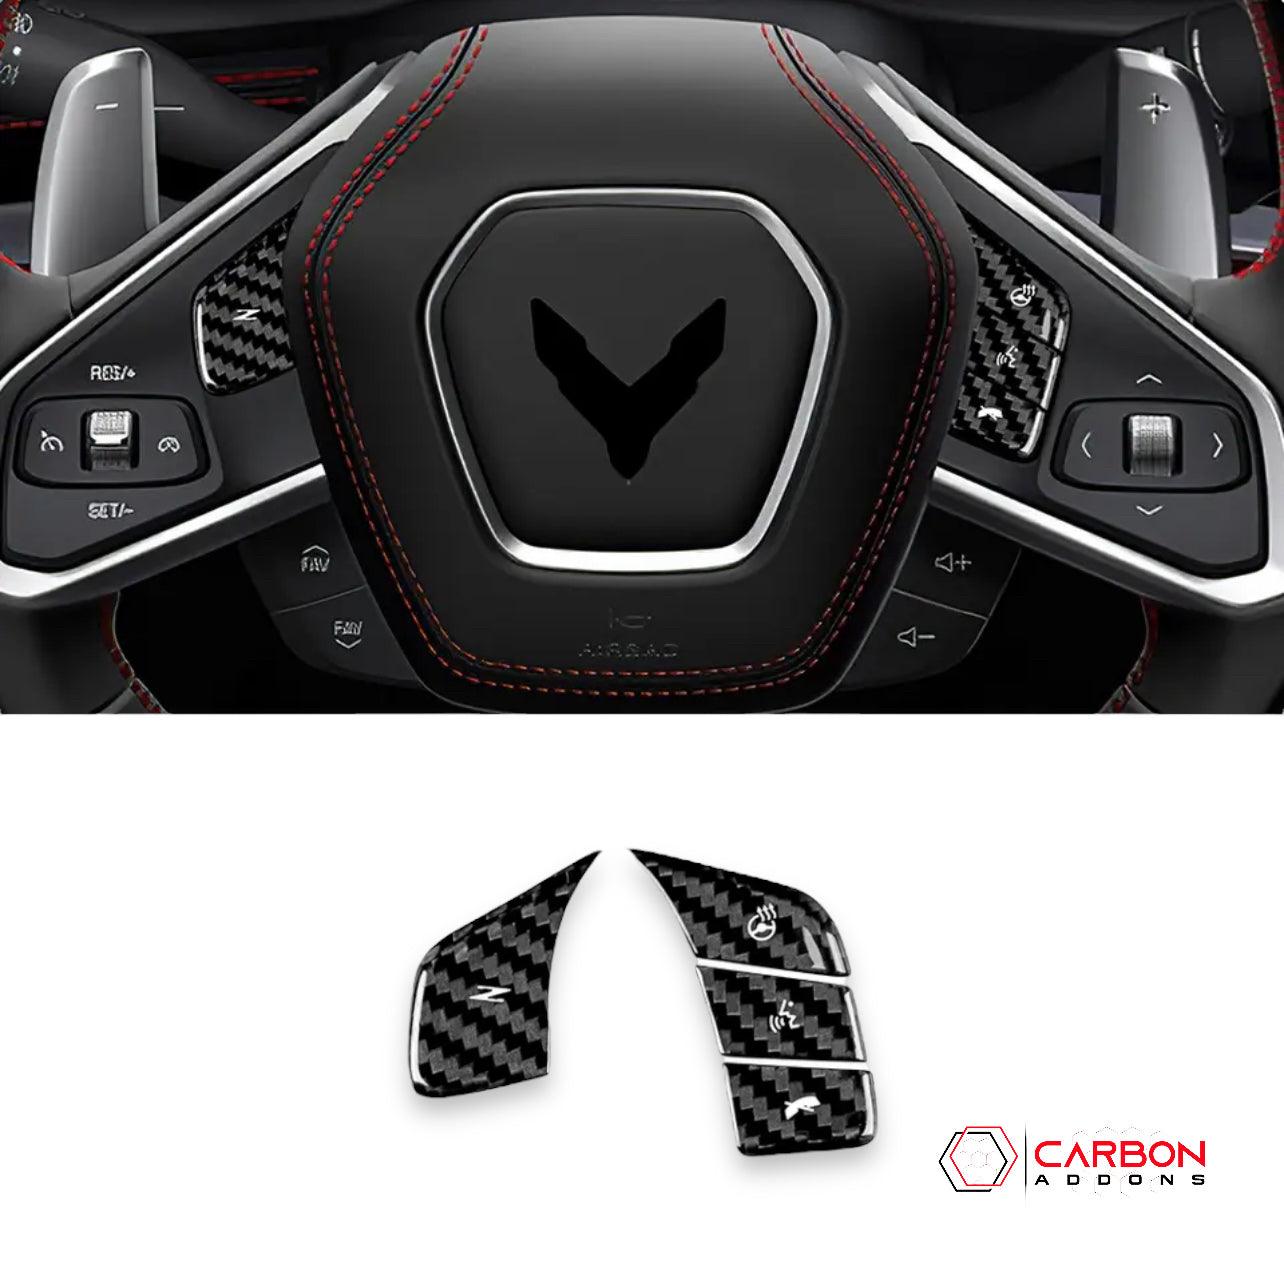 C8 Corvette Carbon Fiber Heated and Non Heated Steering Wheel Button Covers - carbonaddons Carbon Fiber Parts, Accessories, Upgrades, Mods